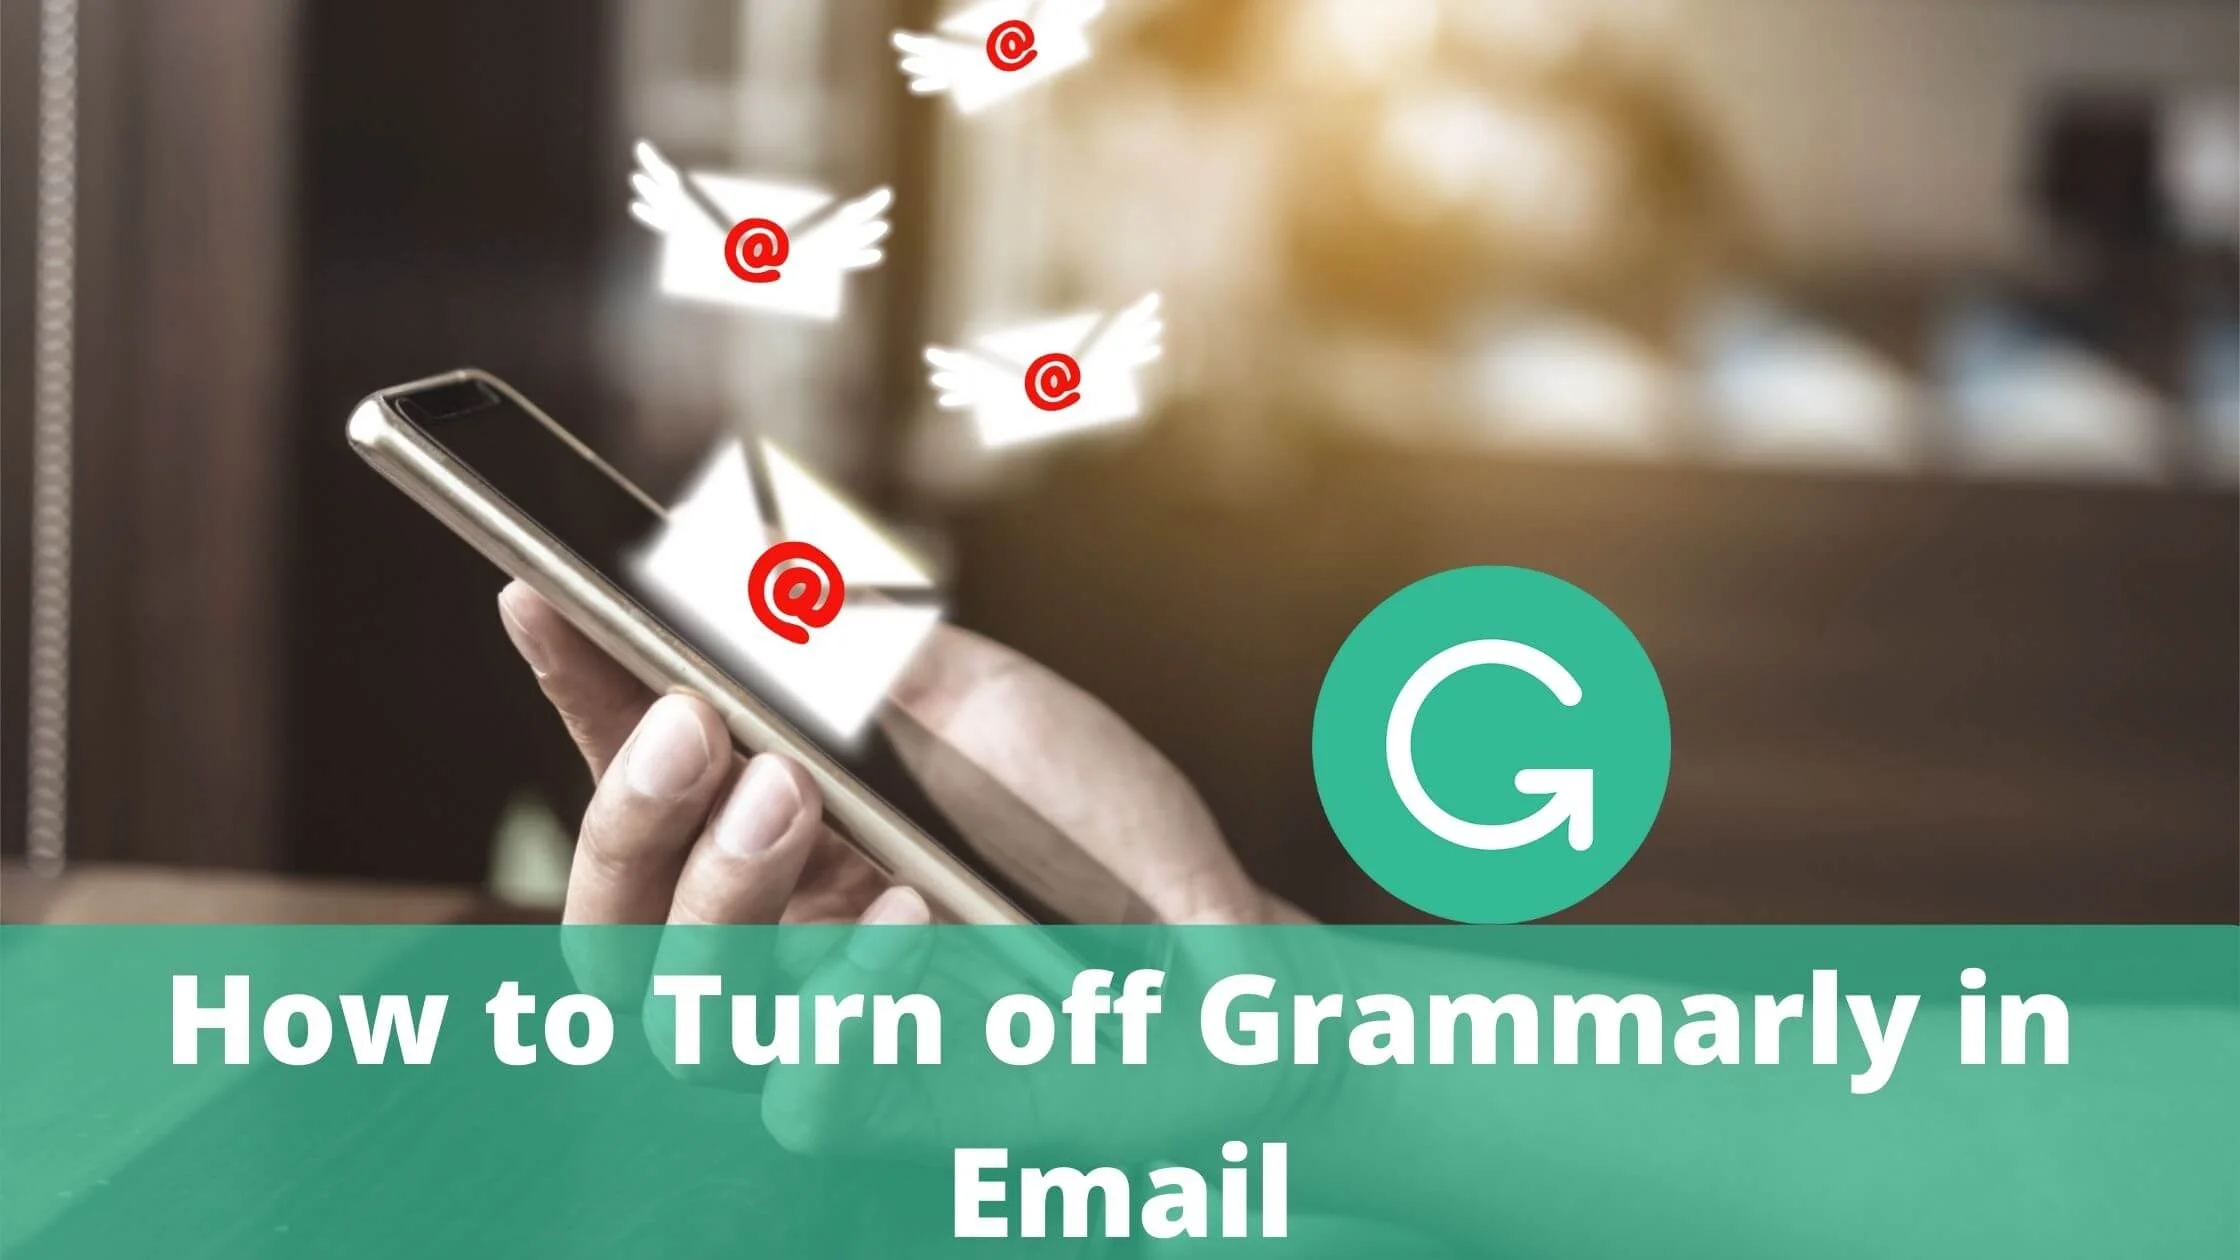 Turn off Grammarly in Email